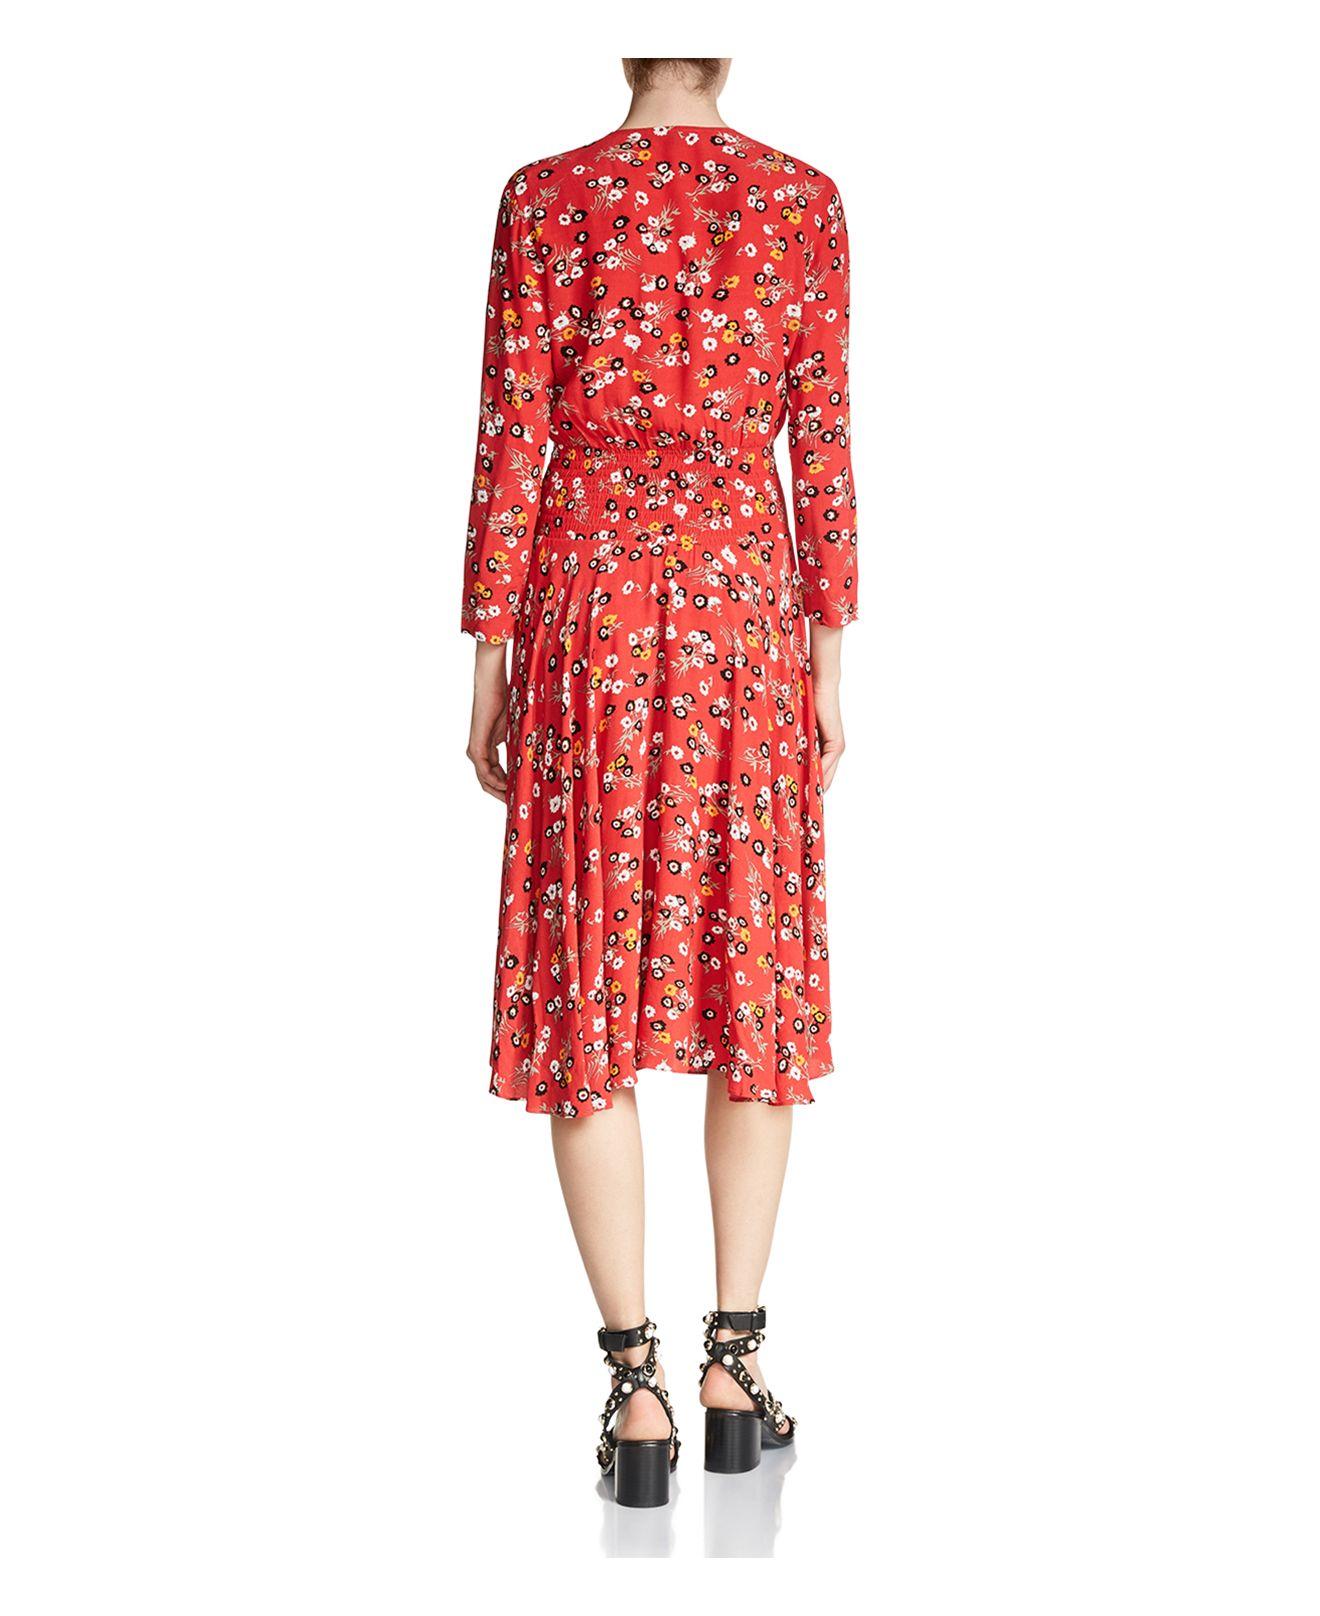 Maje Rayelle Floral Print Dress in Red - Lyst